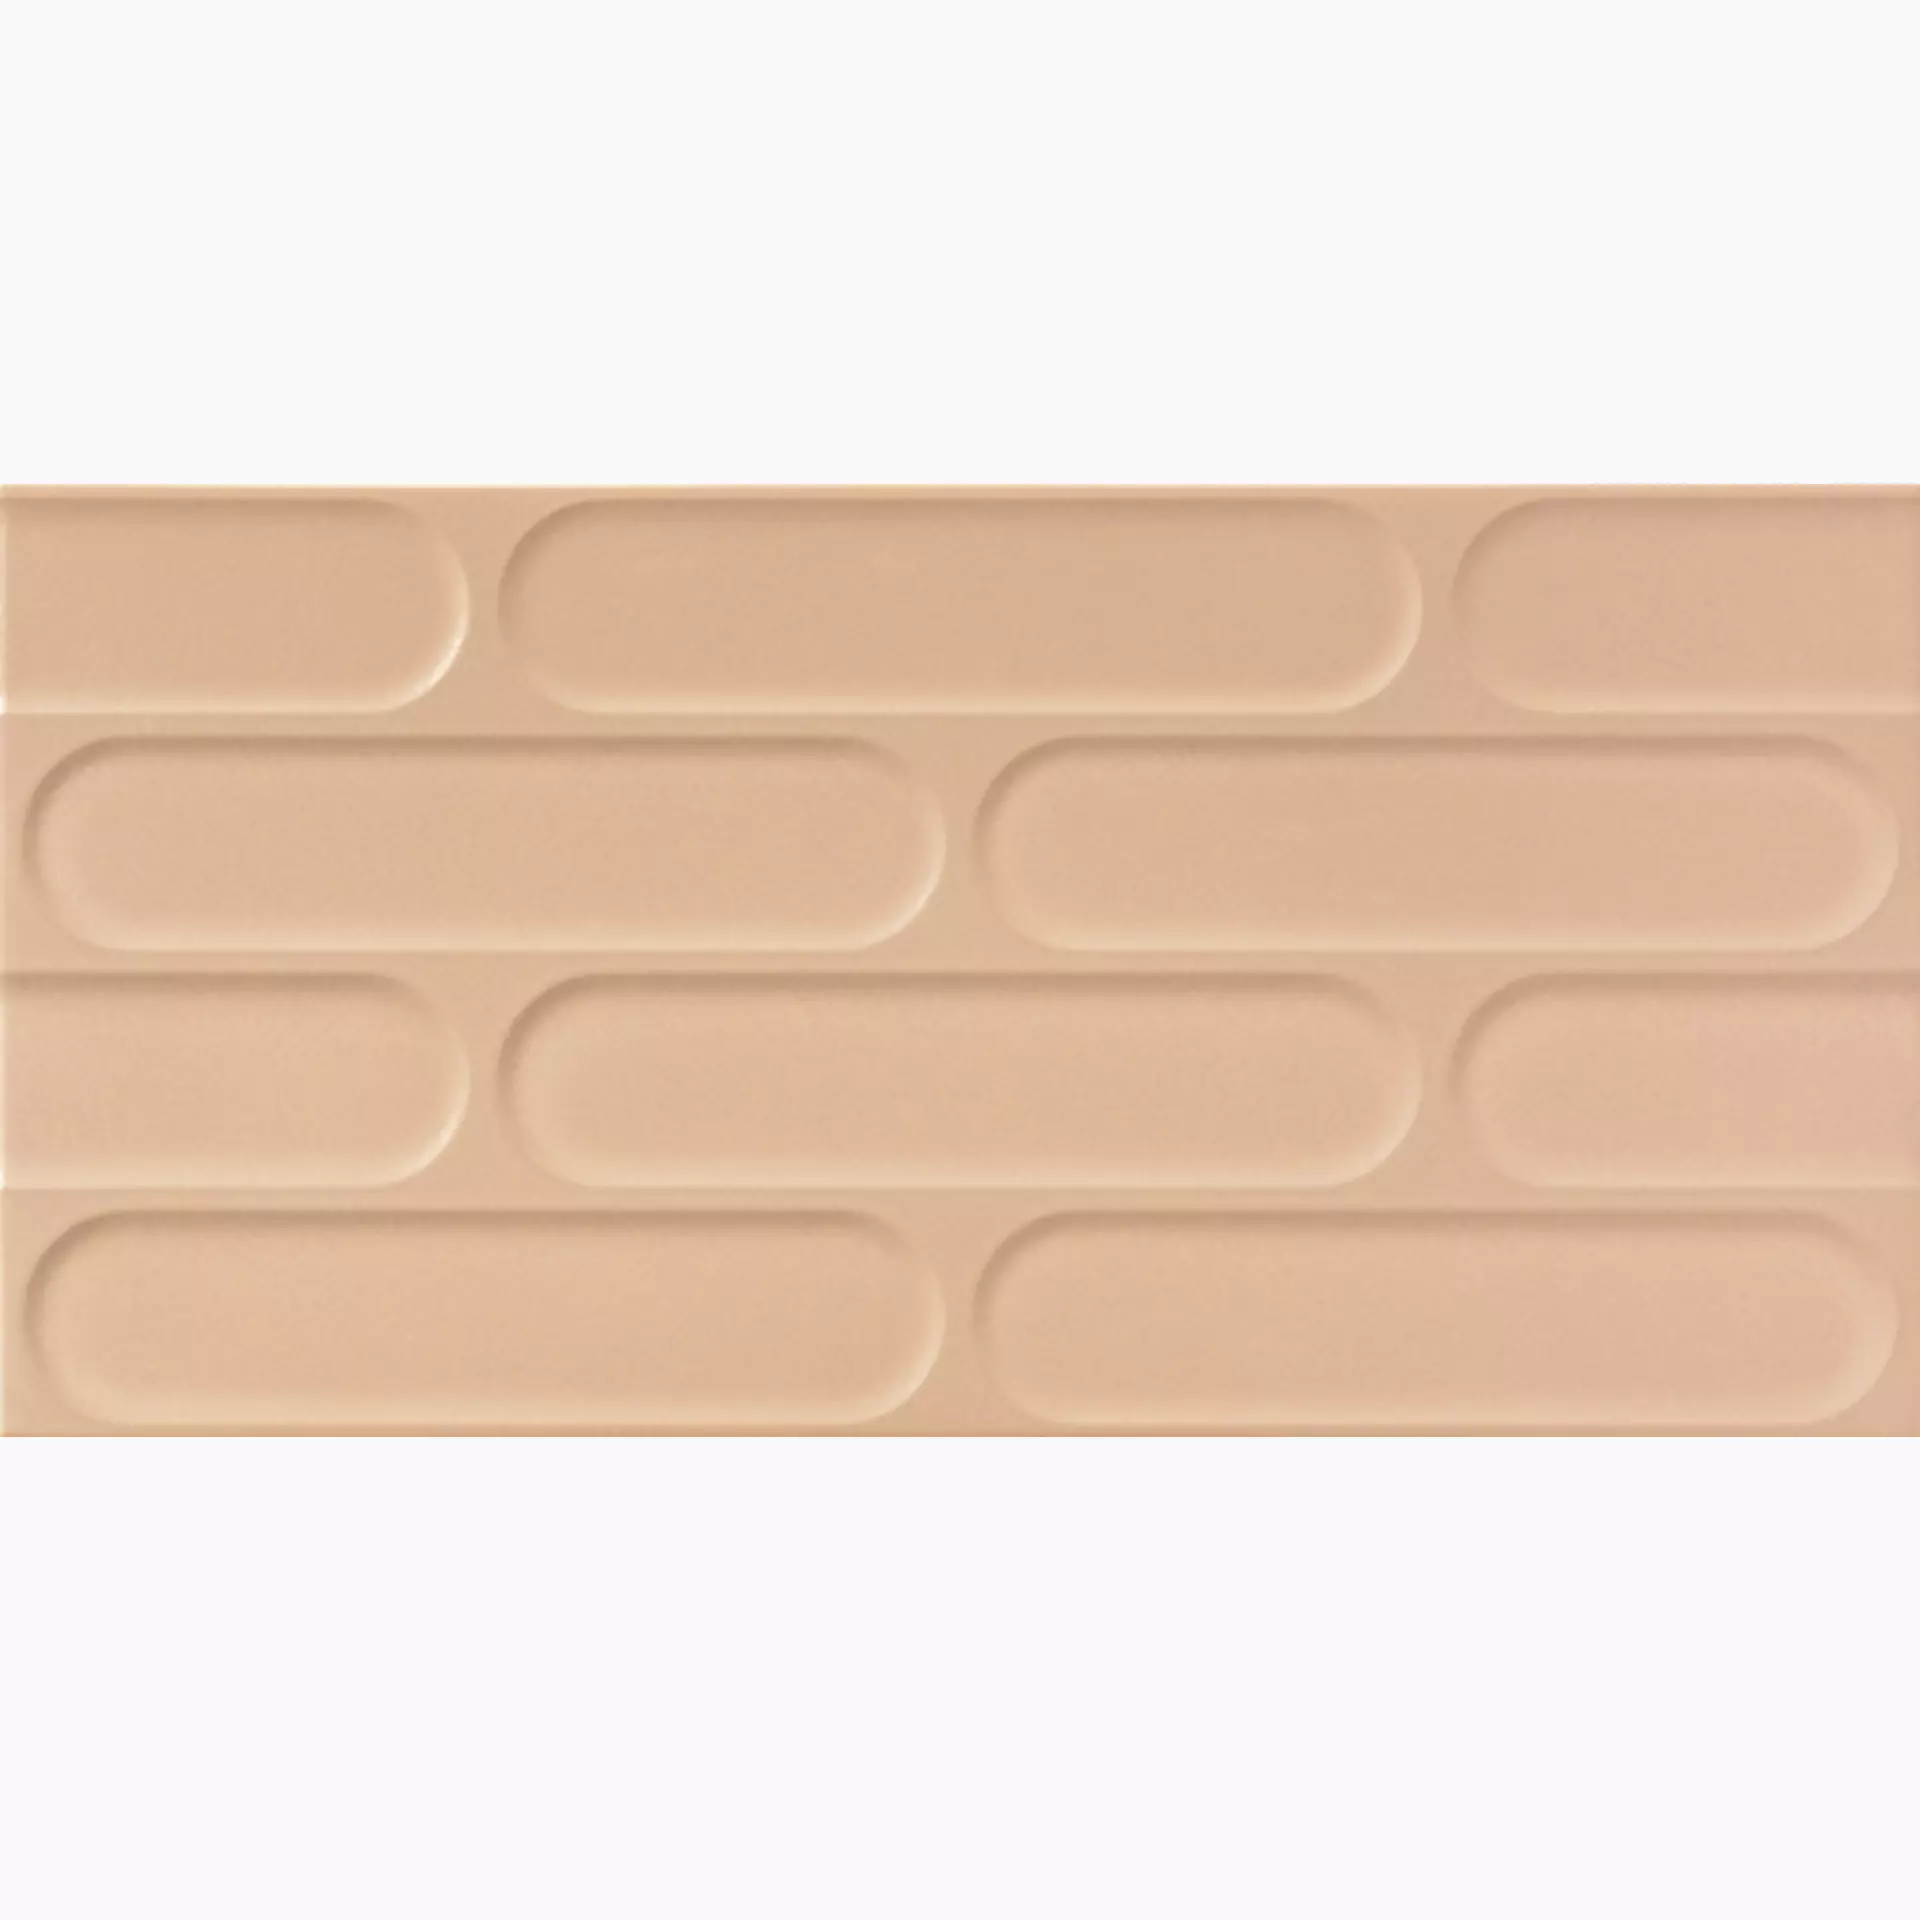 Fioranese Fio.Biscuit Cipria Naturale BIS362R 30,2x60,4cm rectified 10mm